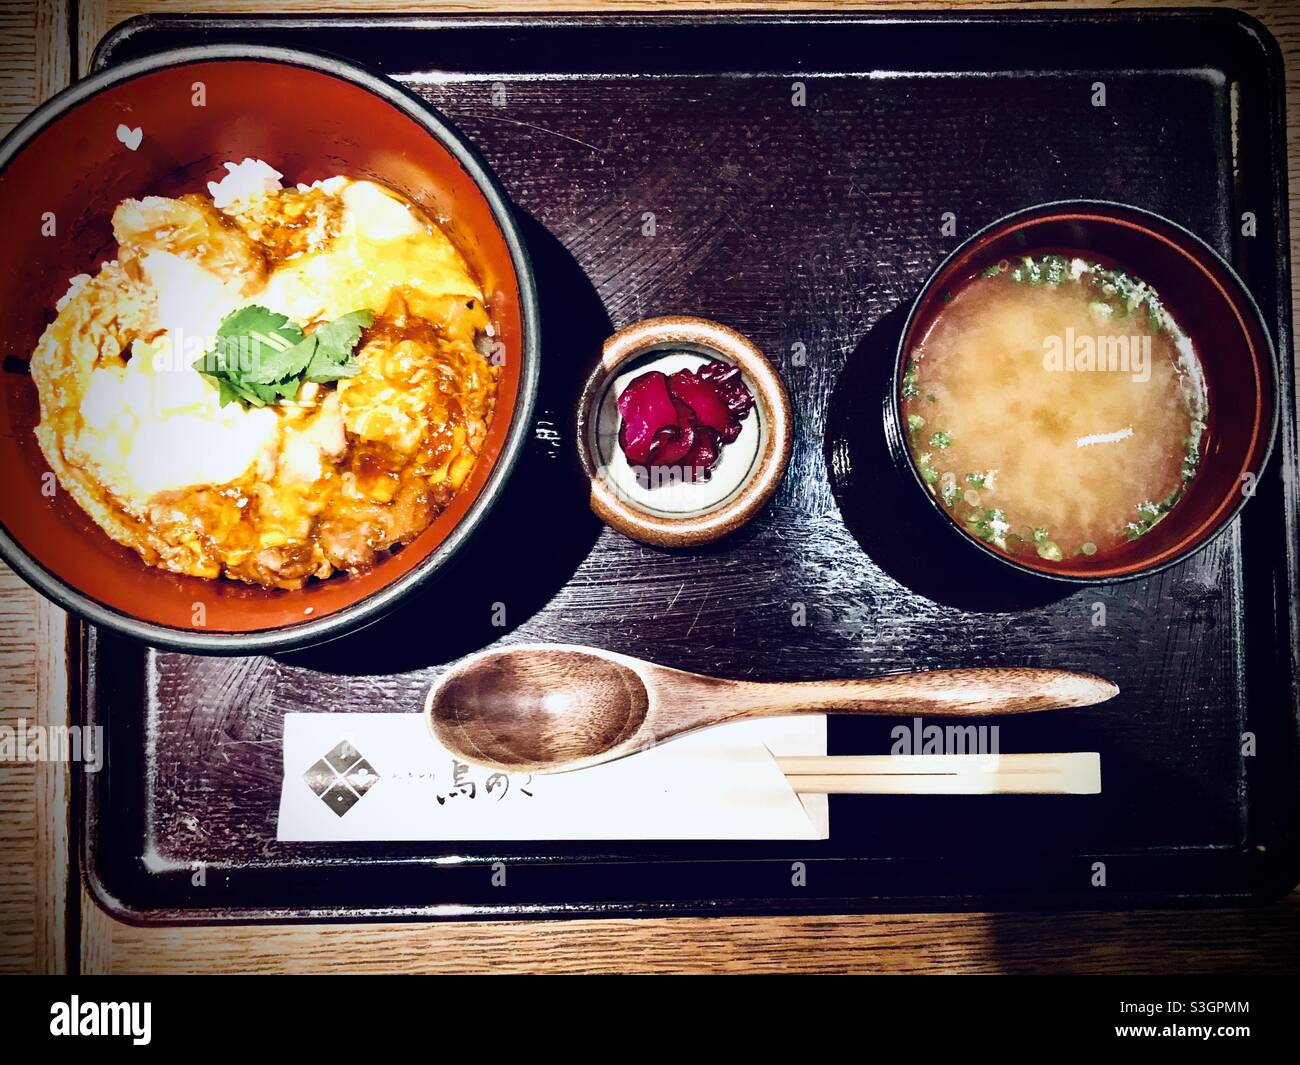 Japanese oyakodon set menu: eggs and chicken on rice bowl with miso soup and pickles on a wooden tray Stock Photo